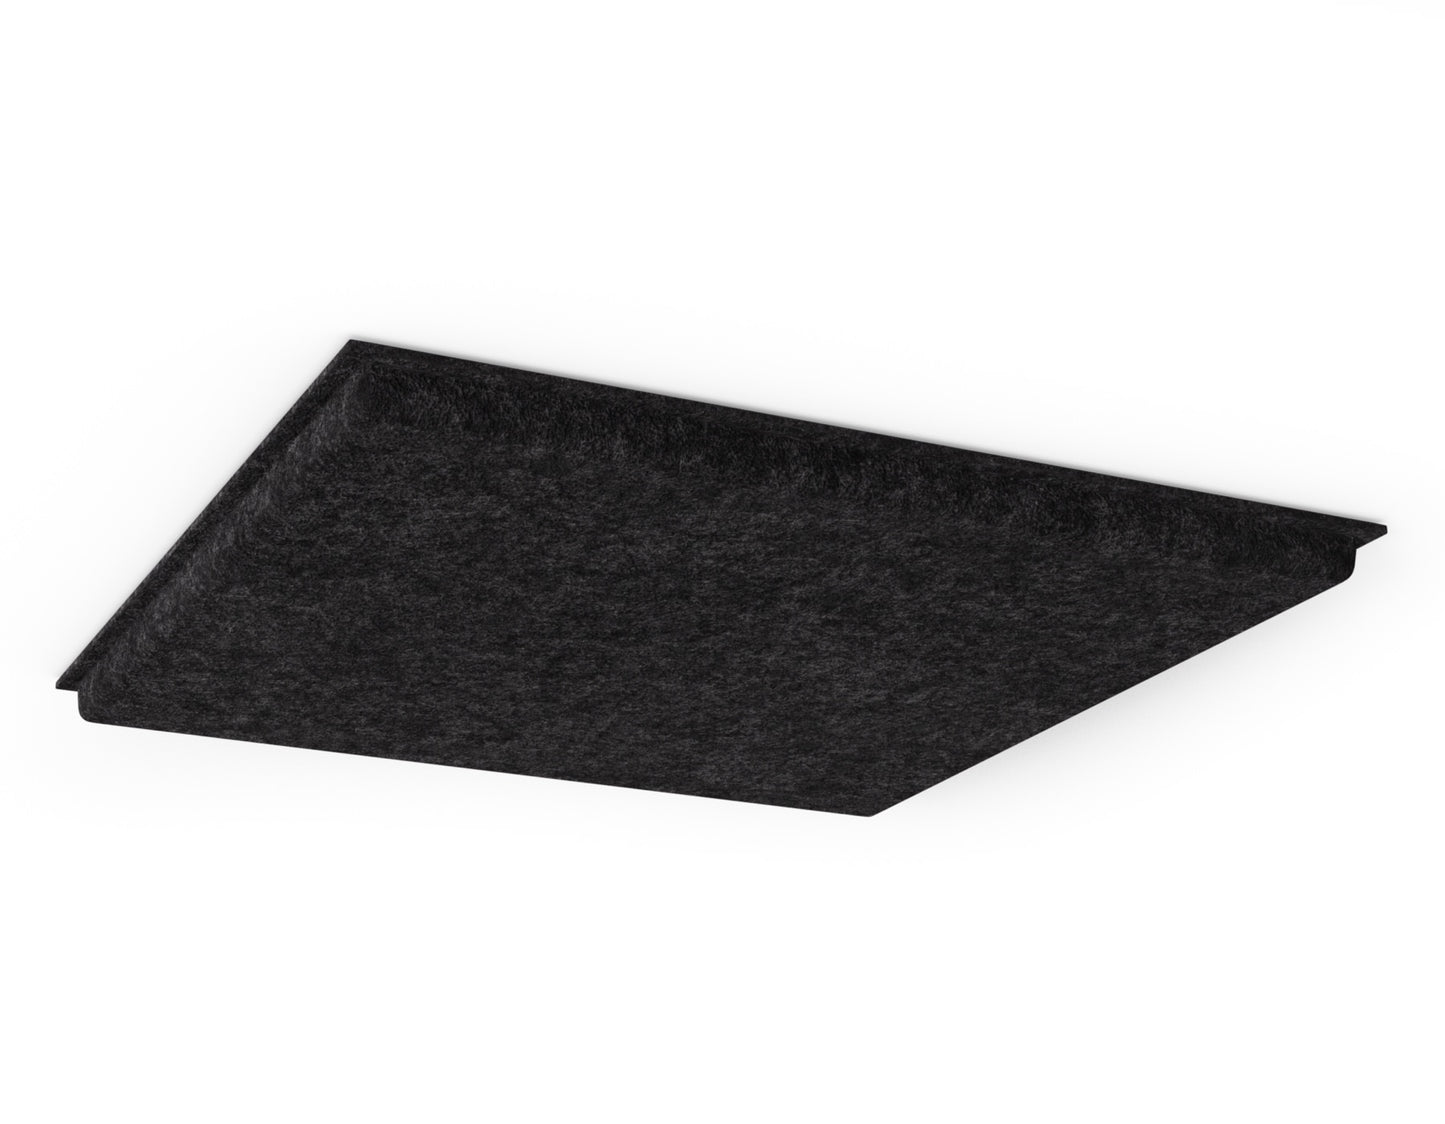 Qwel Ceiling Acoustical Tile (By the box)